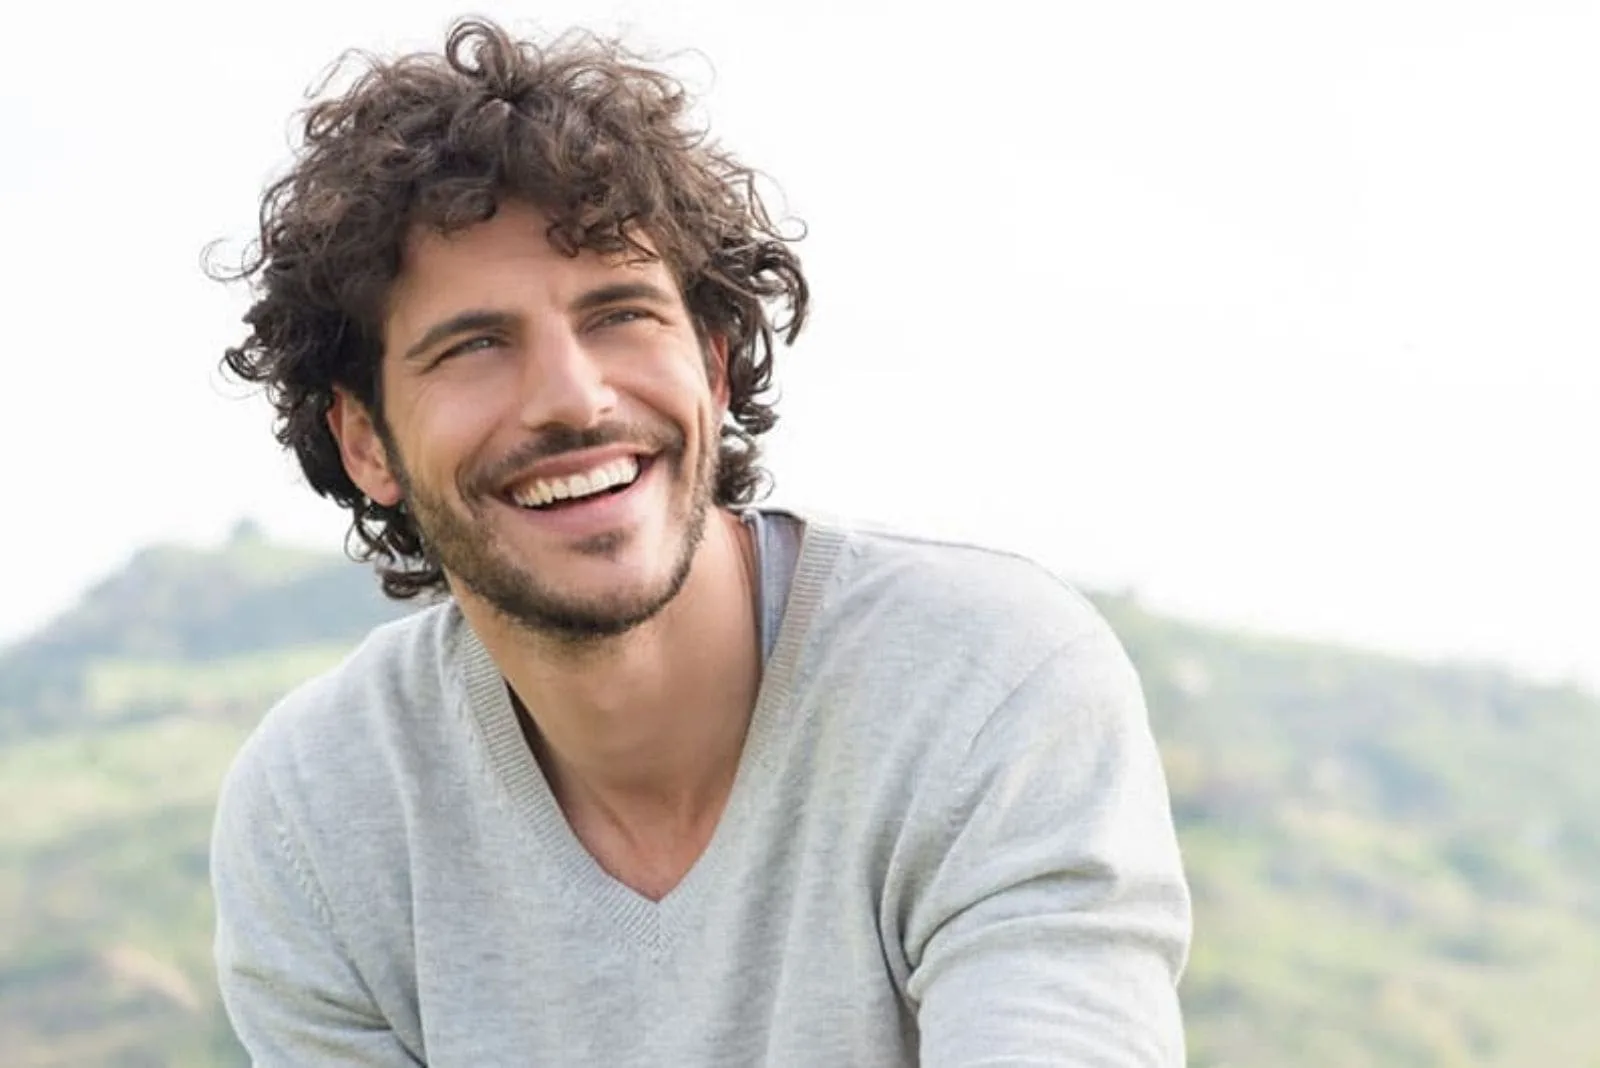 man with curly hair enjoying in nature and smiling